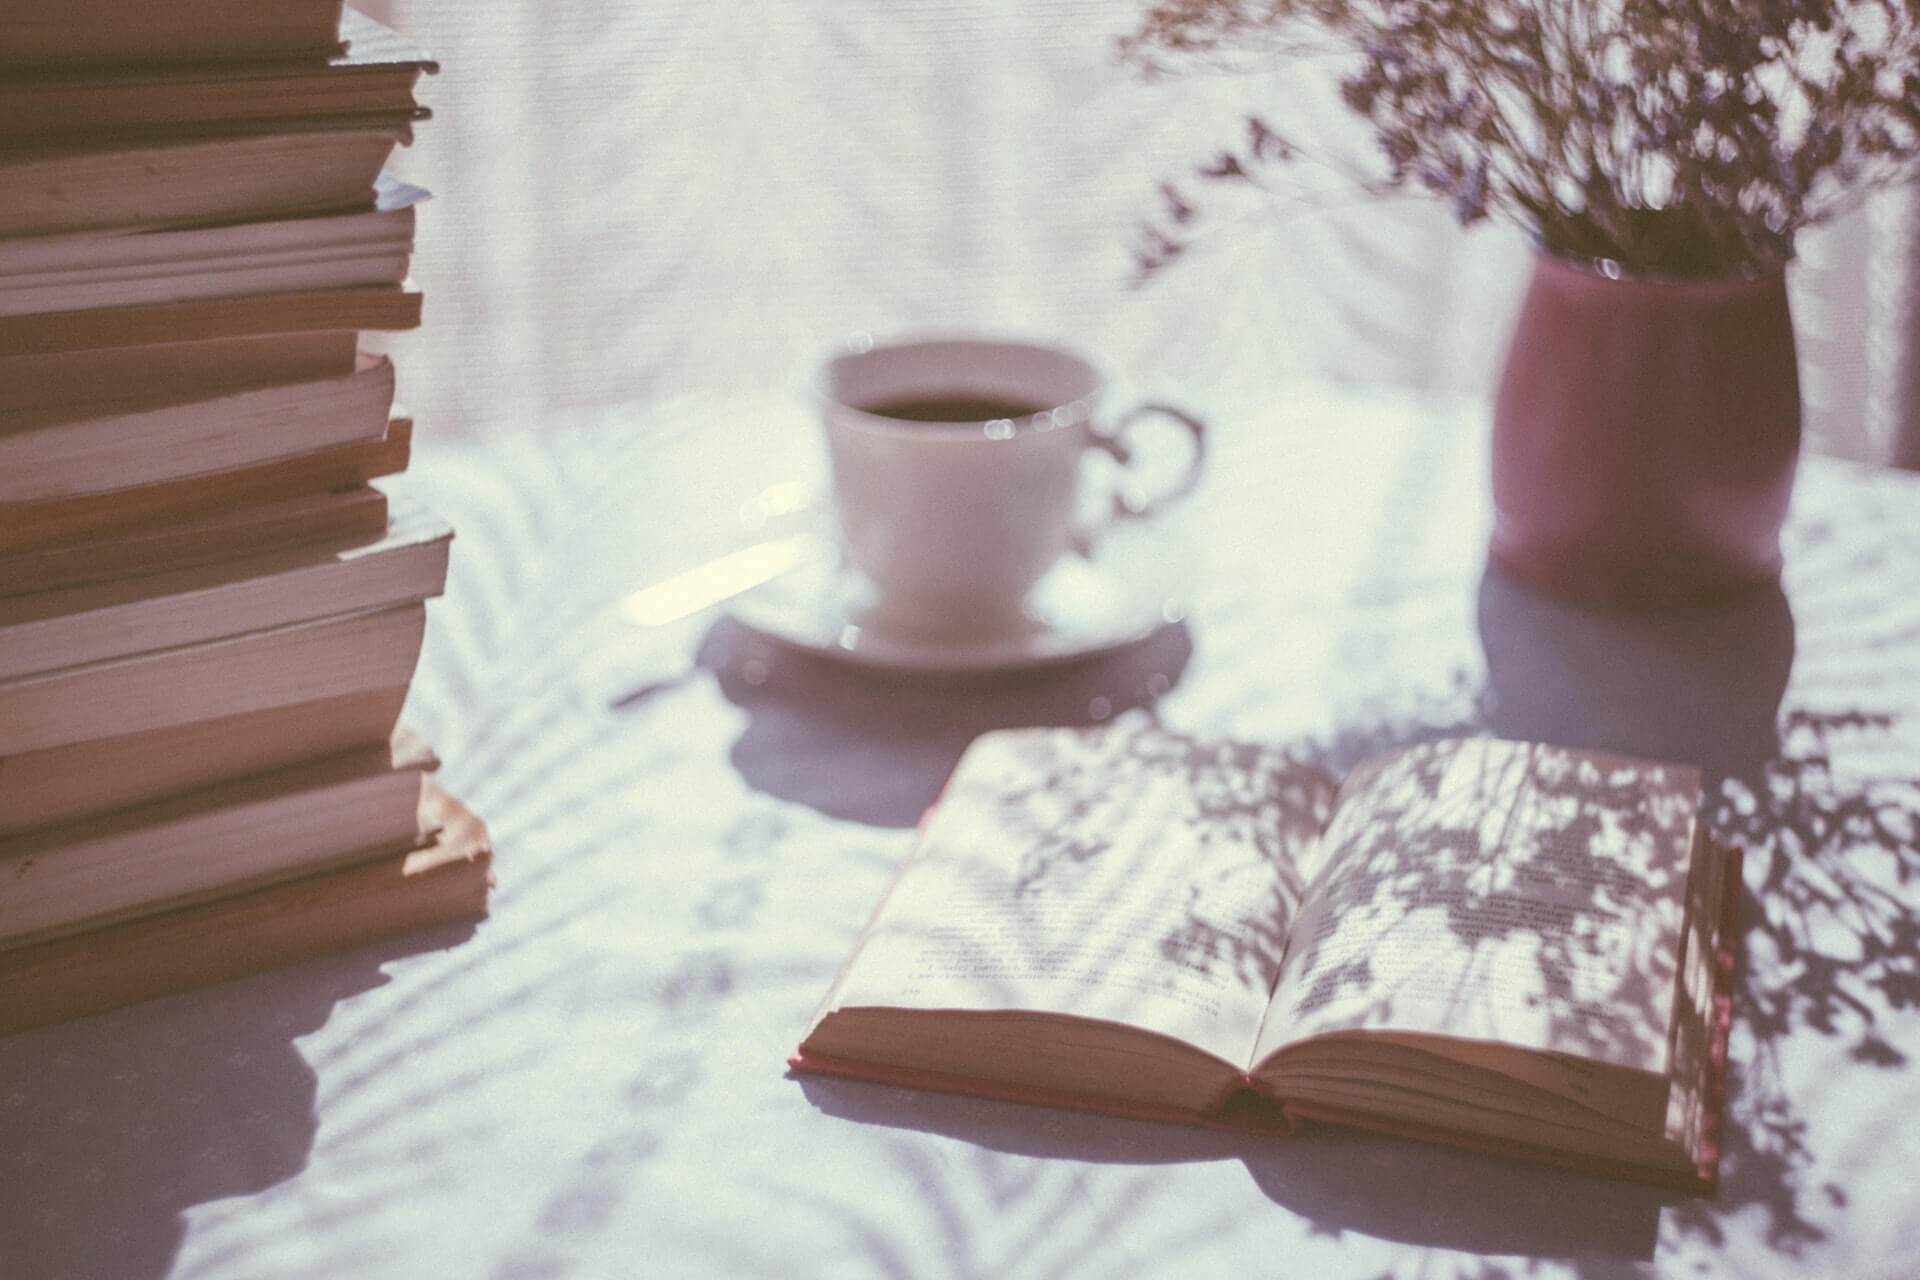 A coffee cup and a stack of books sitting on a table.